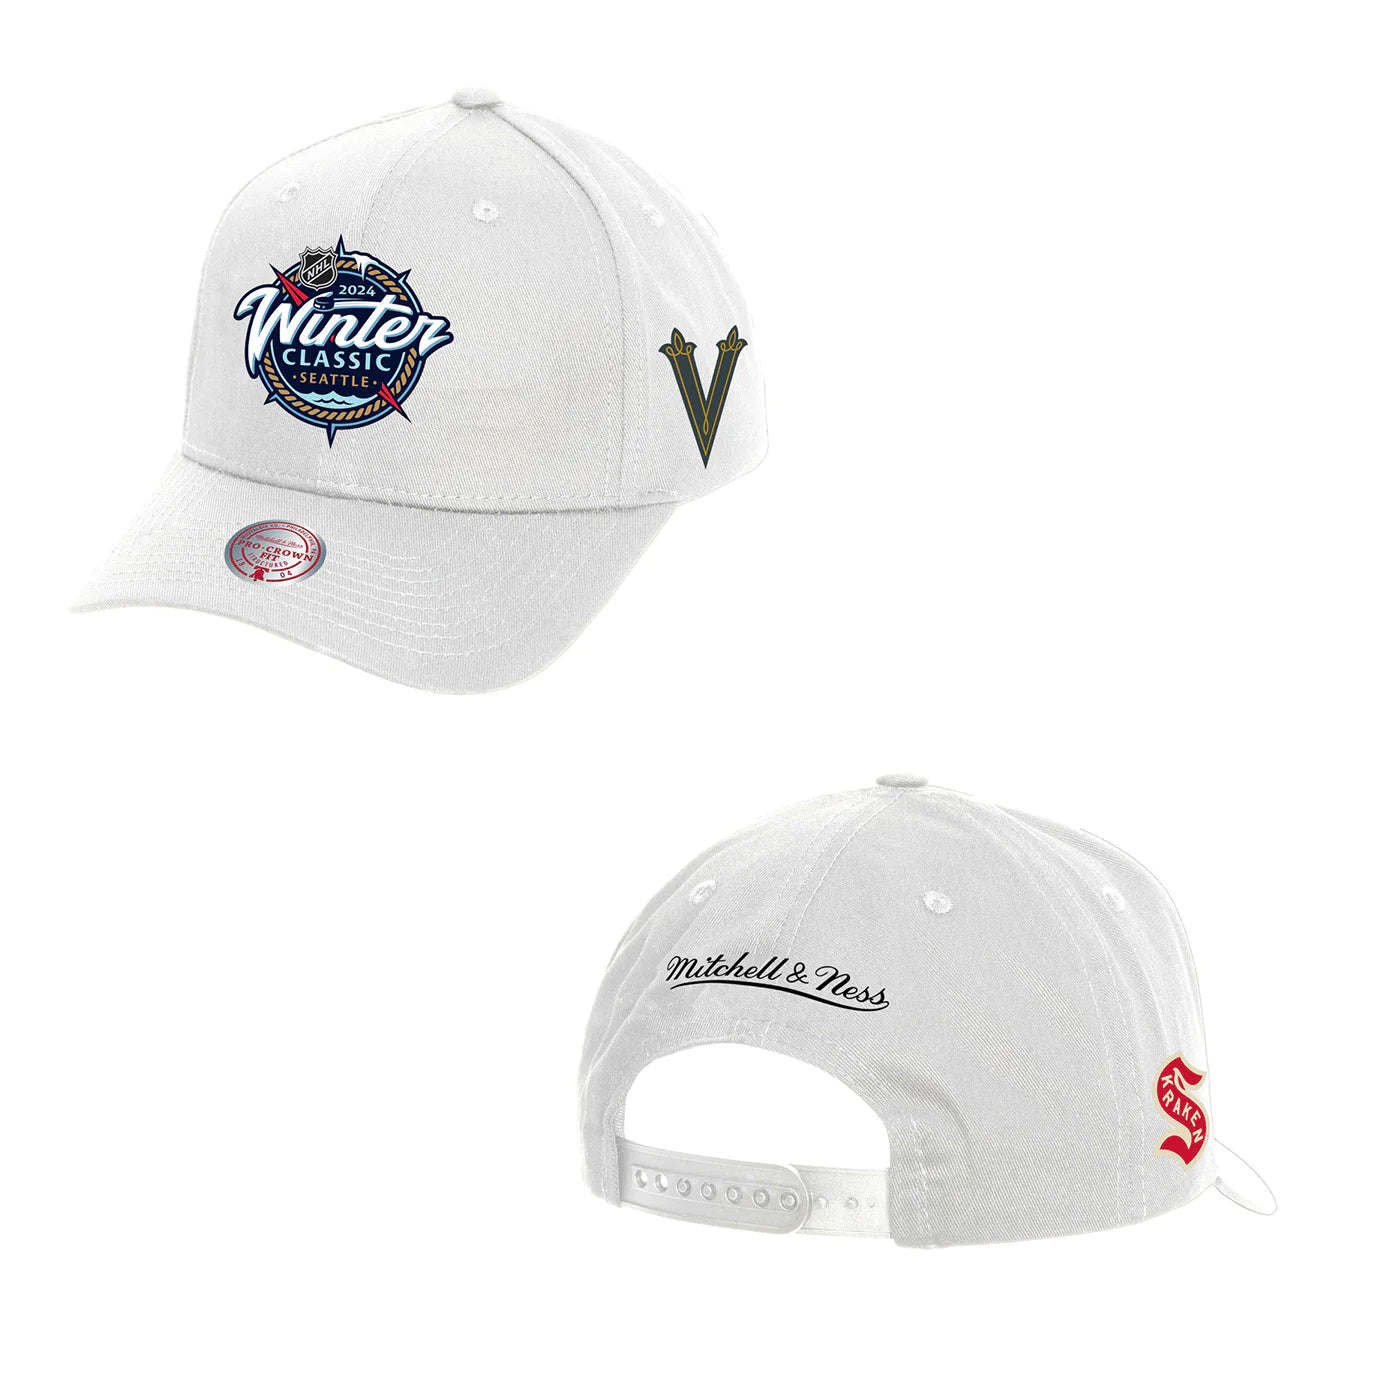 NHL Winter Classic White Matchup Hat